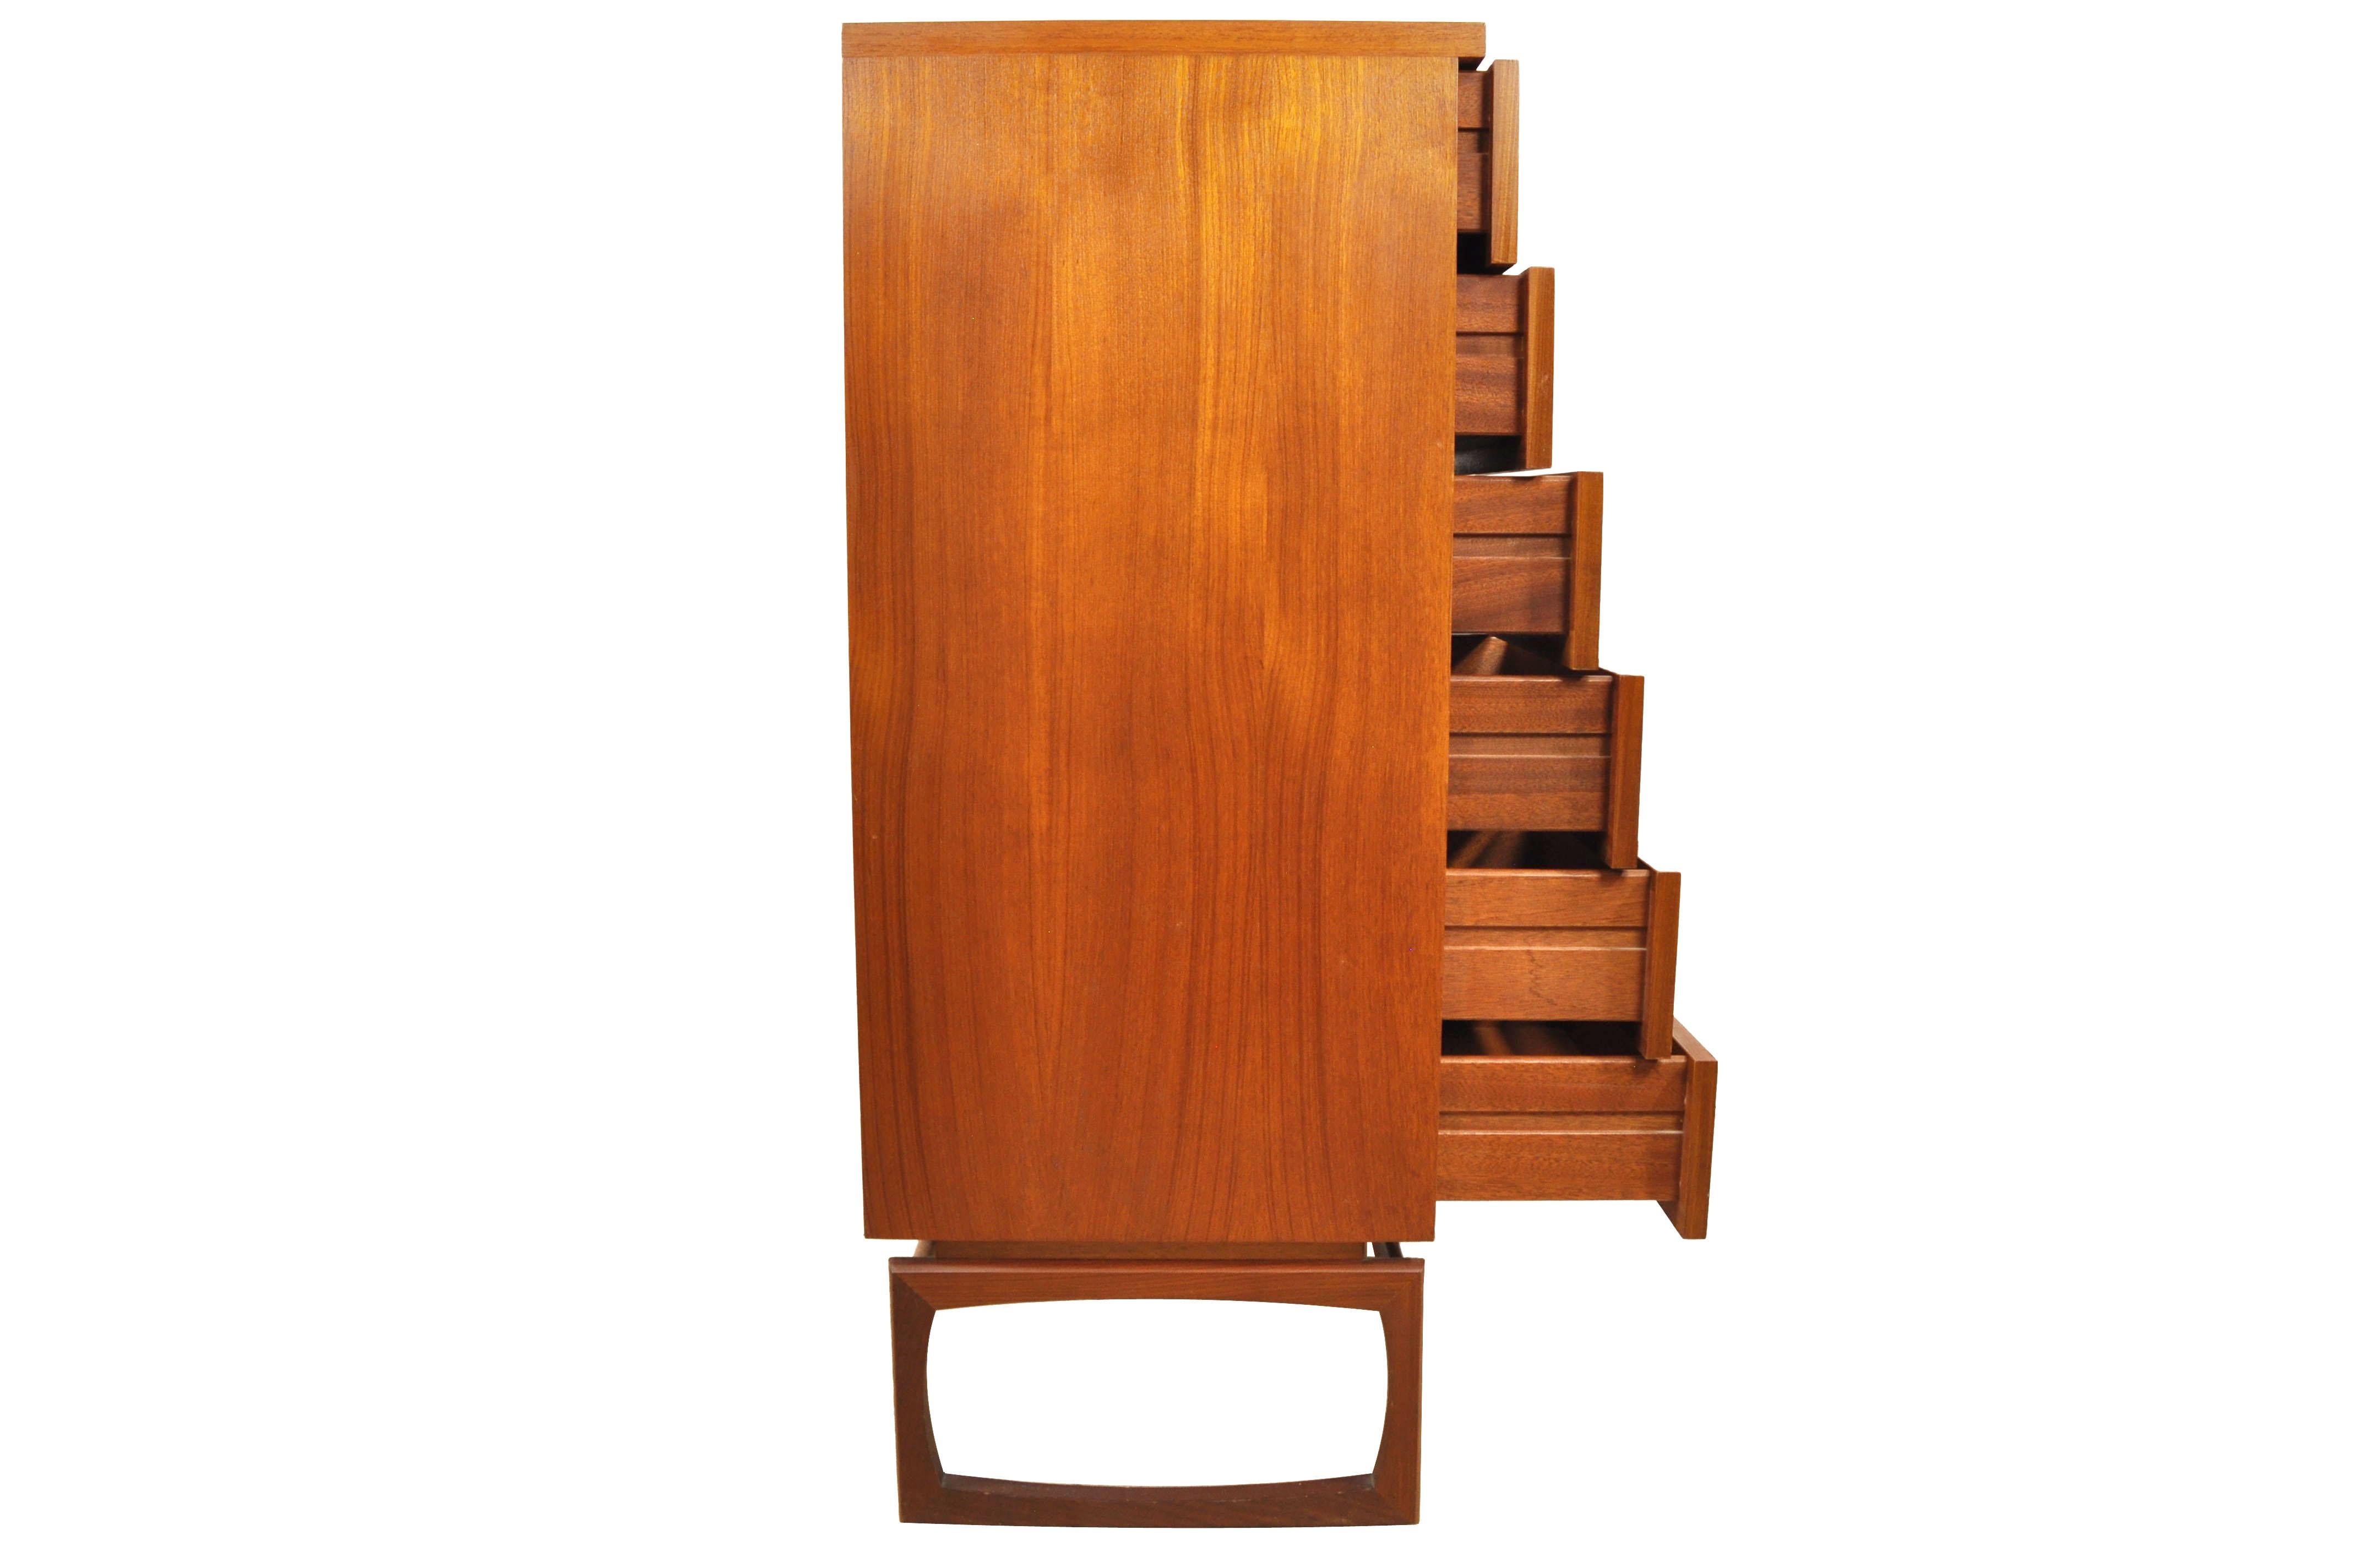 Joinery Mid-Century Modern Chest of Drawers Dresser by G-Plan, England, circa 1965